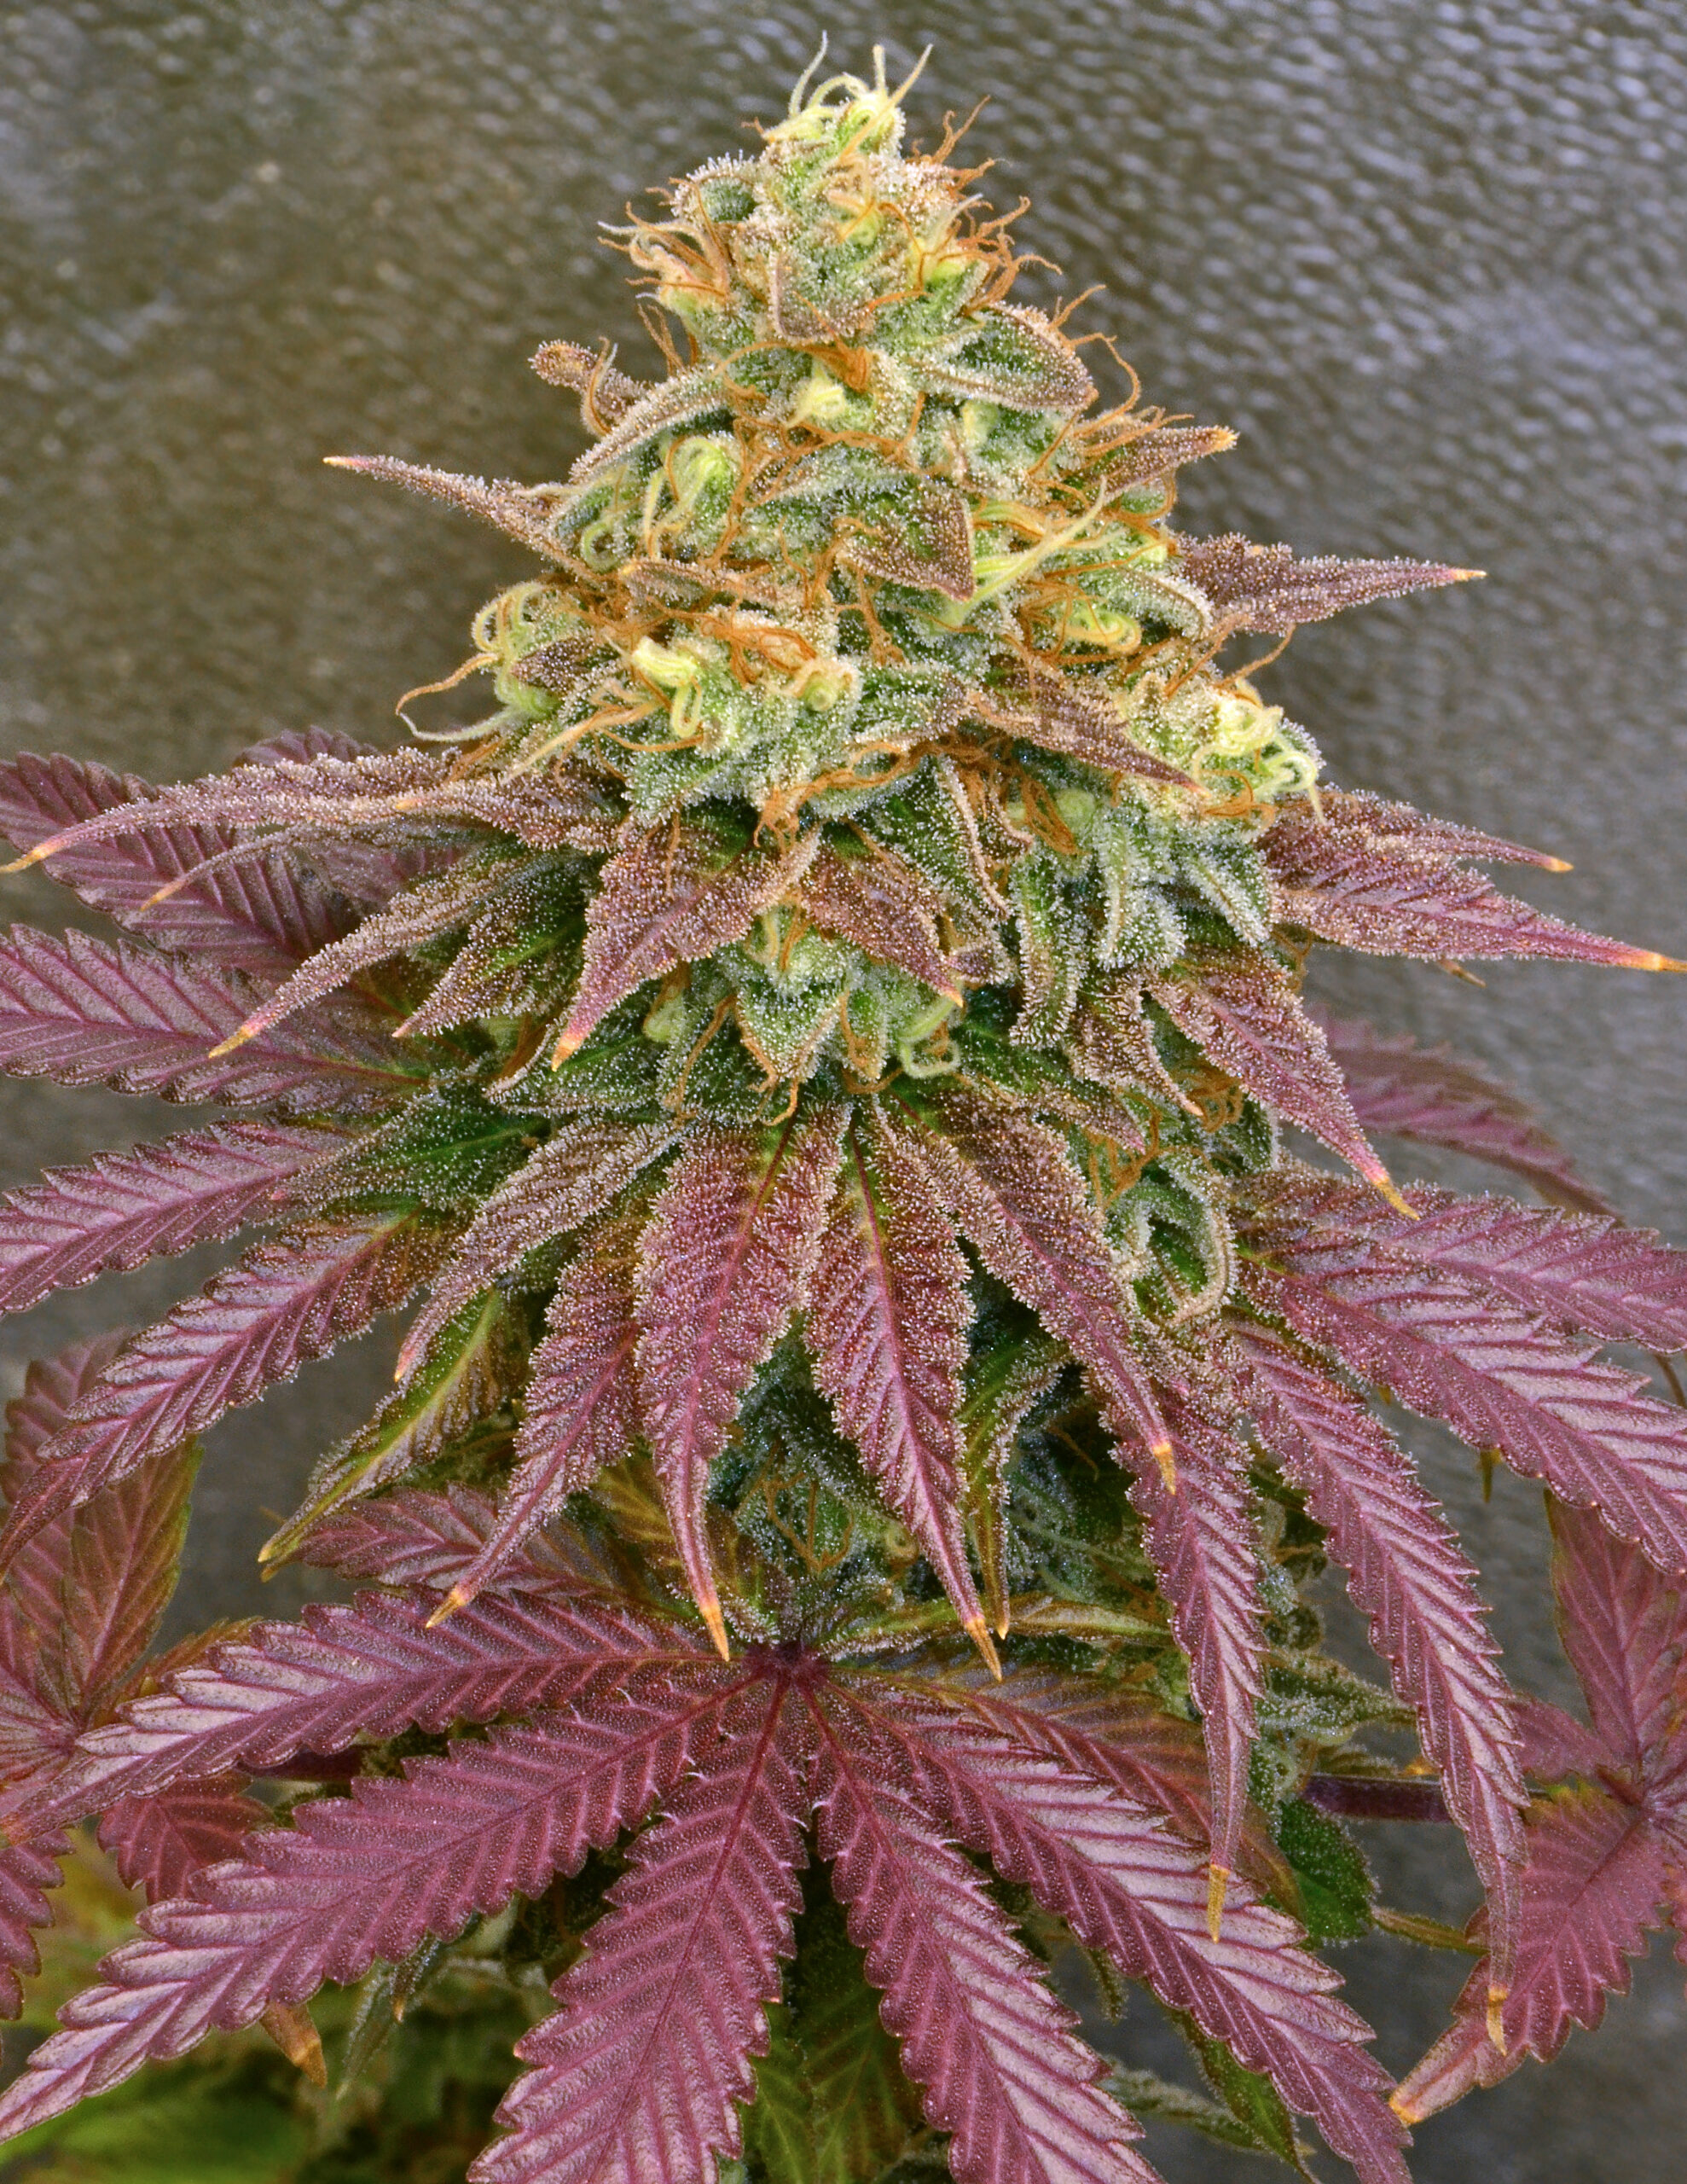 MK Ultra x “Pure Hindu Kush” from D.C. bred by me